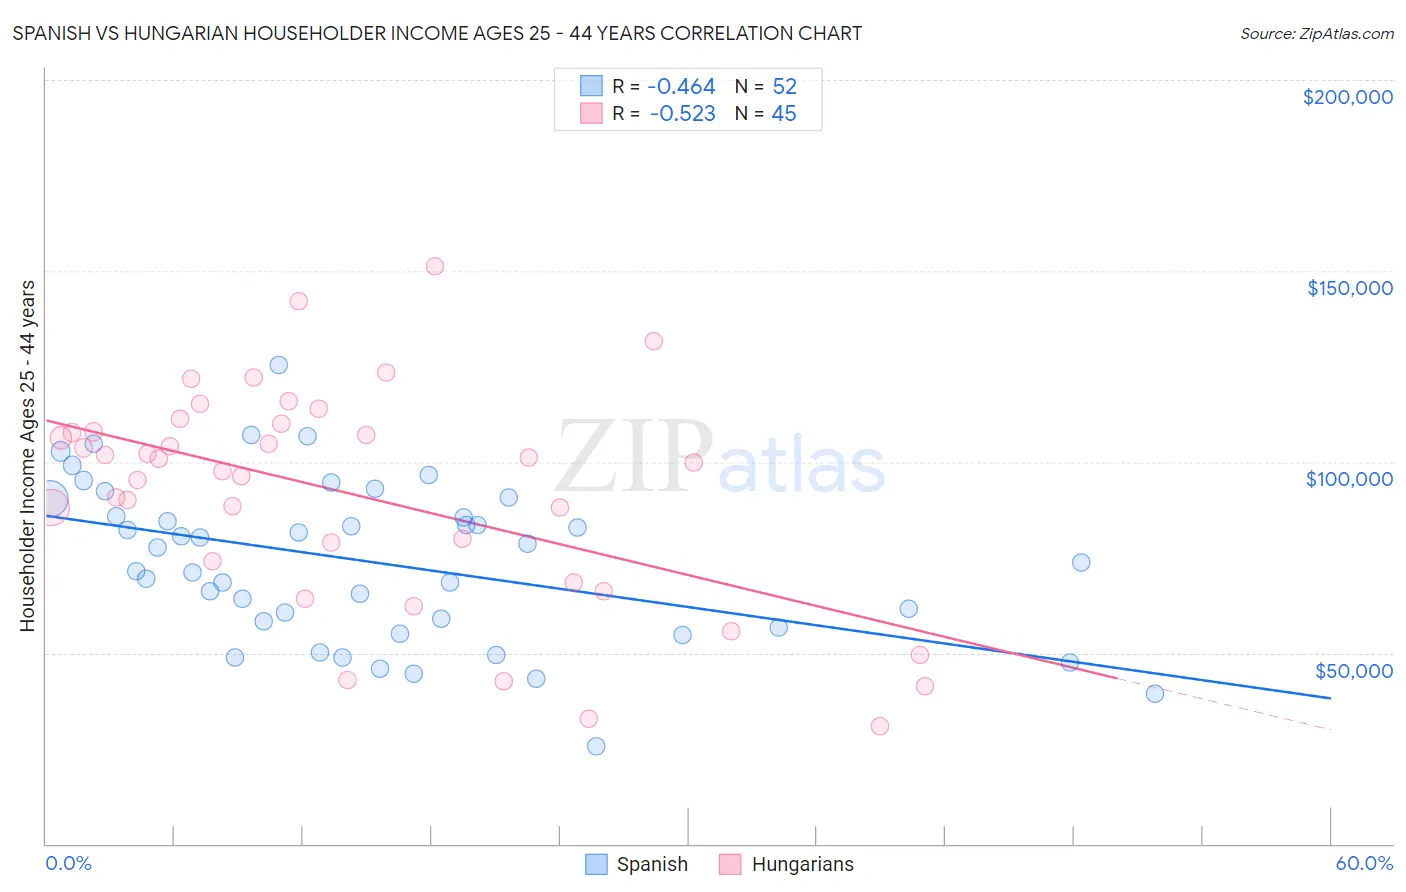 Spanish vs Hungarian Householder Income Ages 25 - 44 years